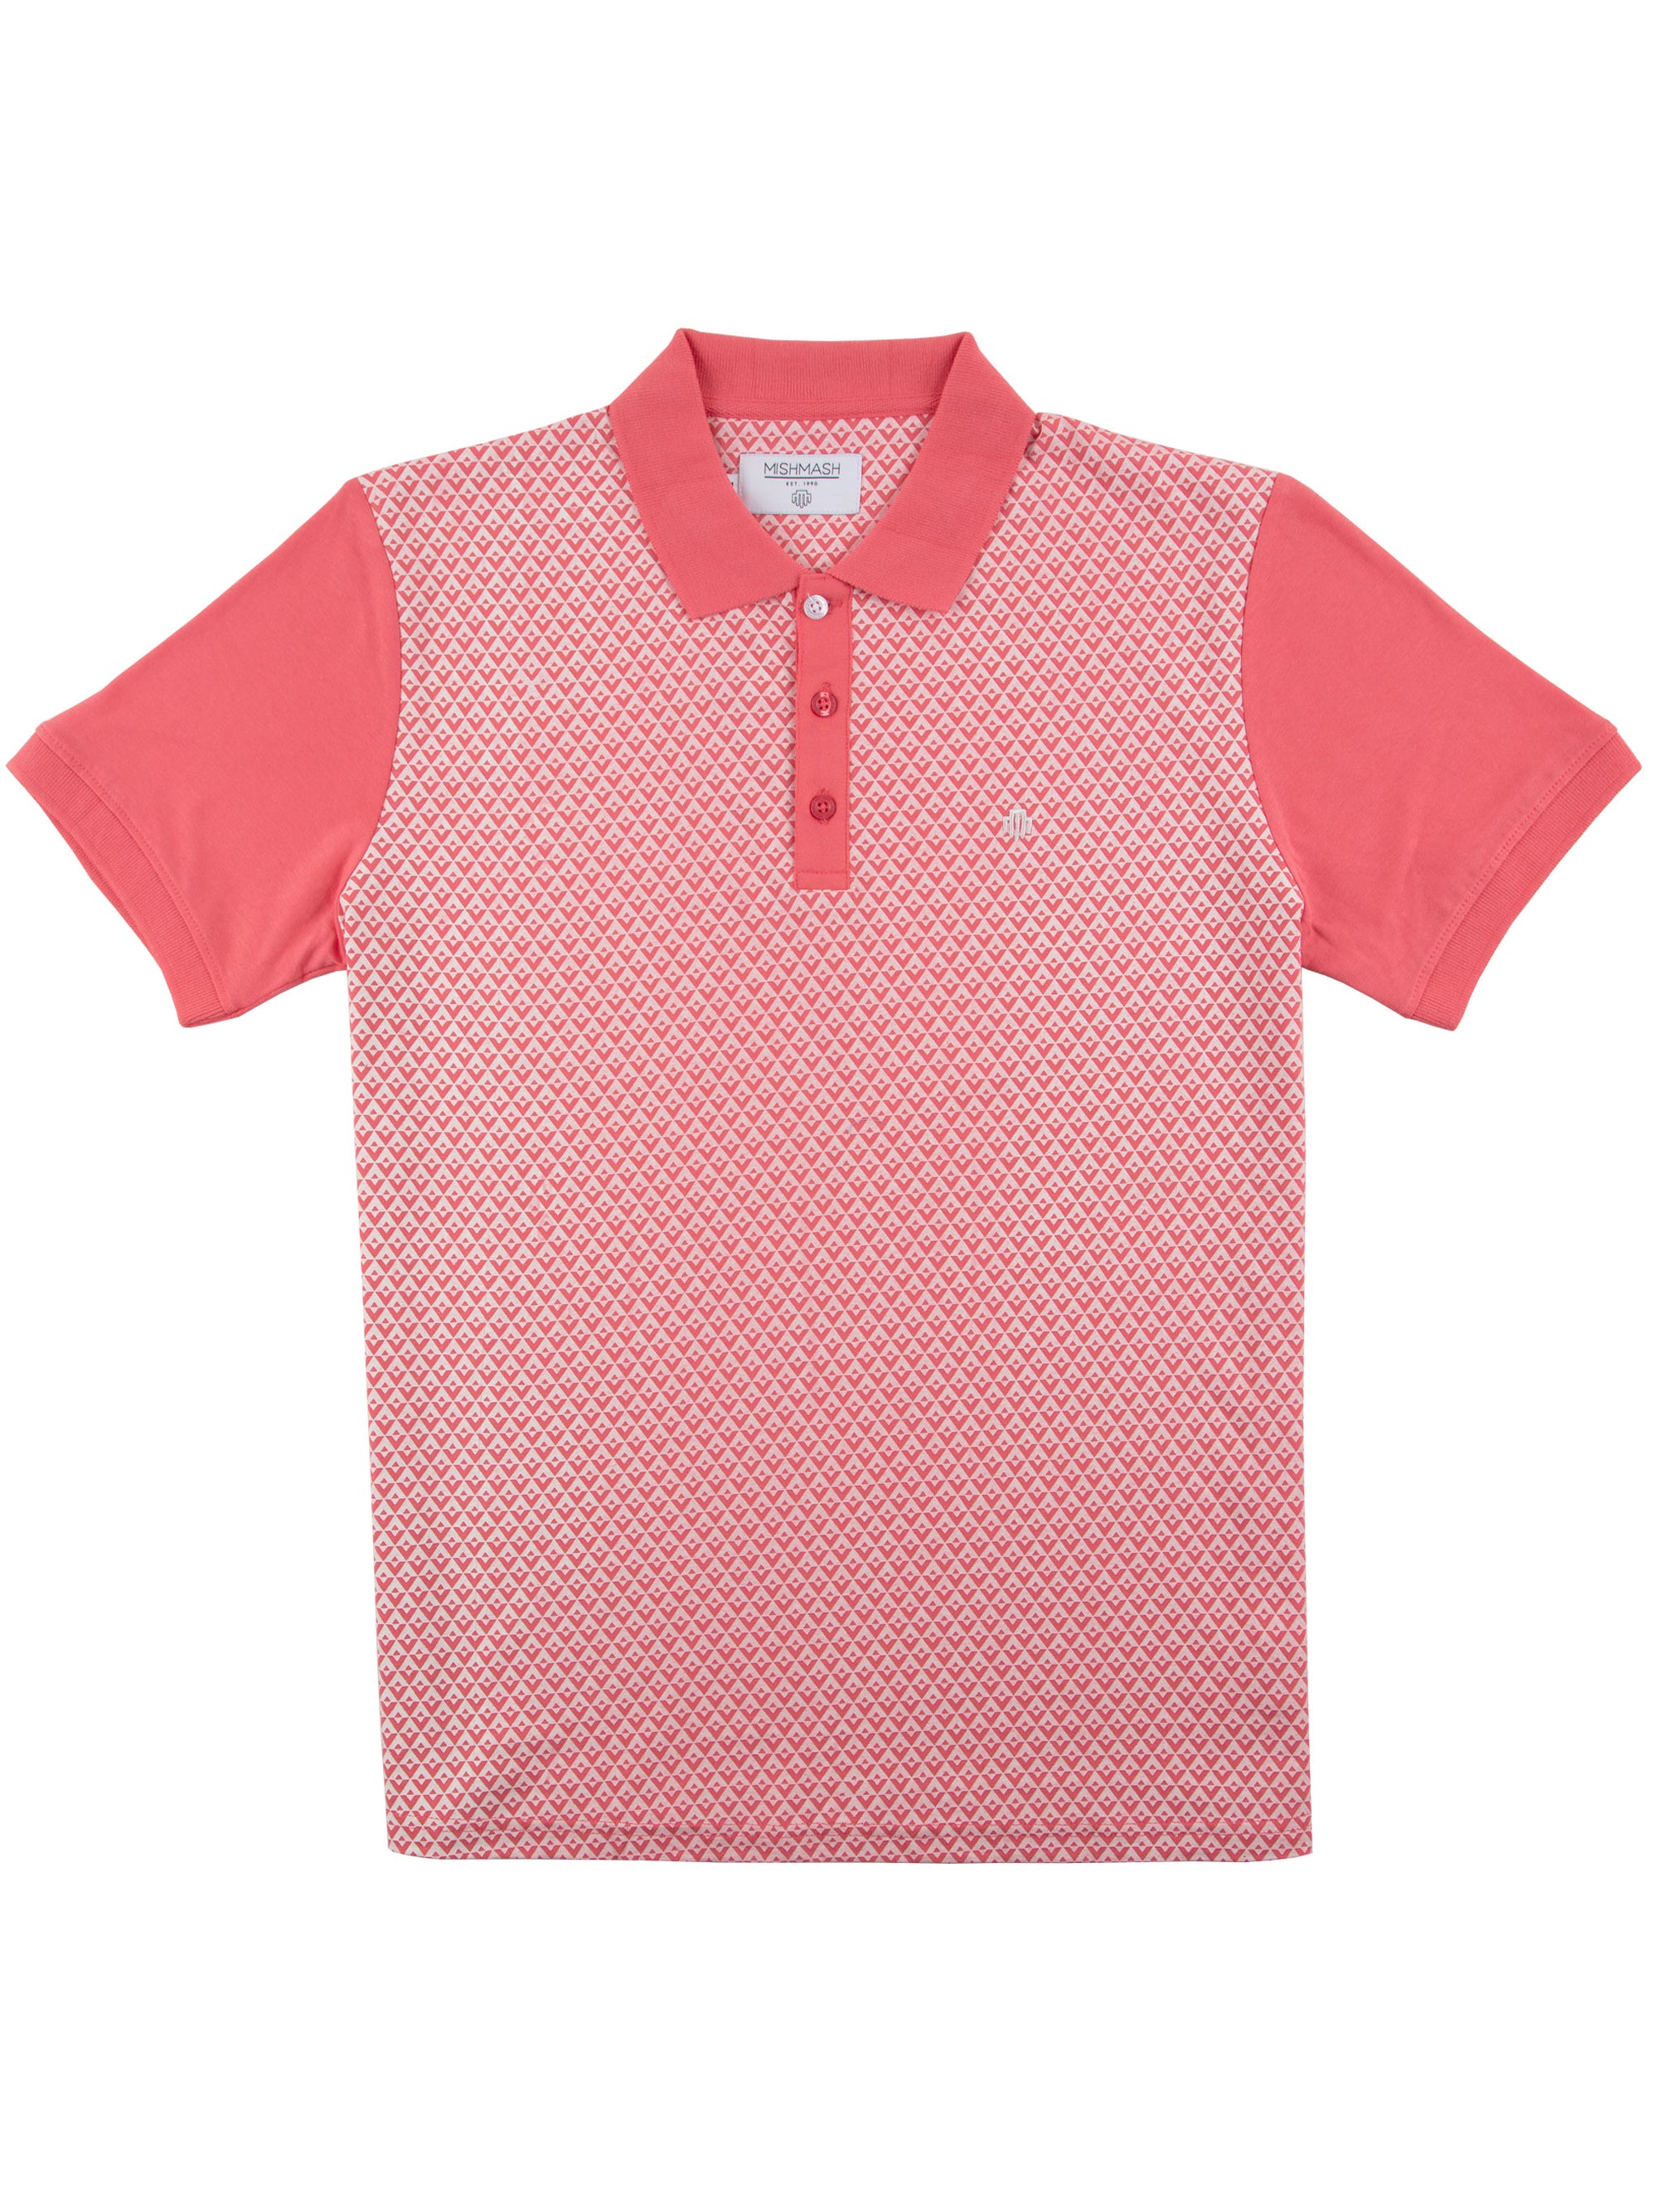 Regular Fit Sirus Pale Red Printed Jersey Polo